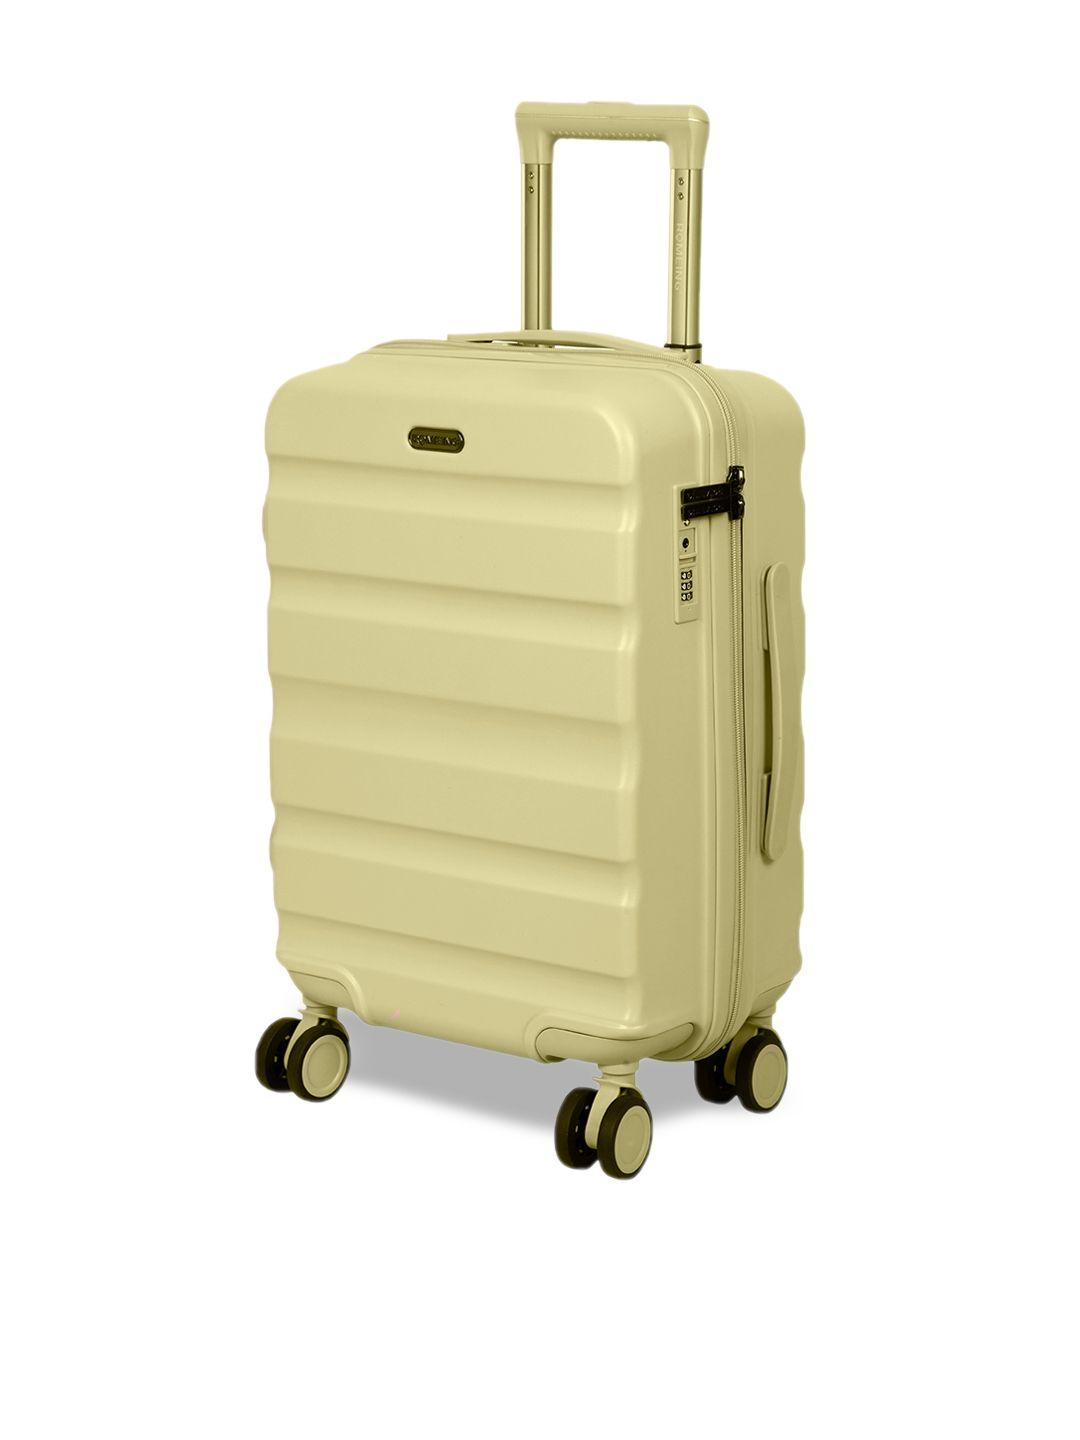 romeing venice yellow textured hard-sided polycarbonate cabin trolley suitcase